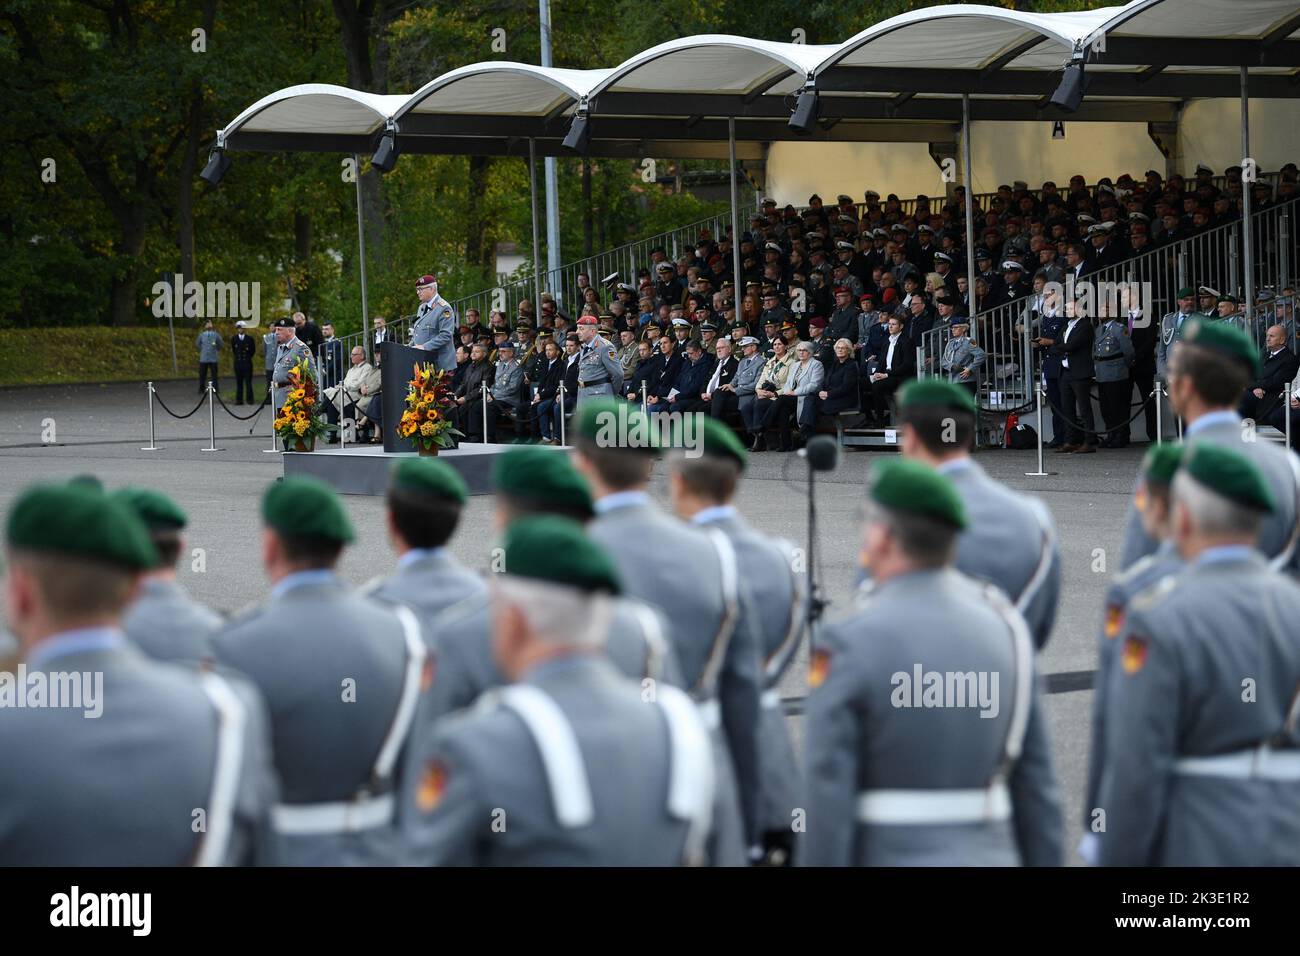 Eberhard Zorn, Inspector General of the Bundeswehr, speaks, as he attends a roll call of the Territorial Command of the German armed forces Bundeswehr, at the Julius-Leber-Kaserne military barracks, in Berlin, Germany September 26, 2022. REUTERS/Annegret Hilse Stock Photo